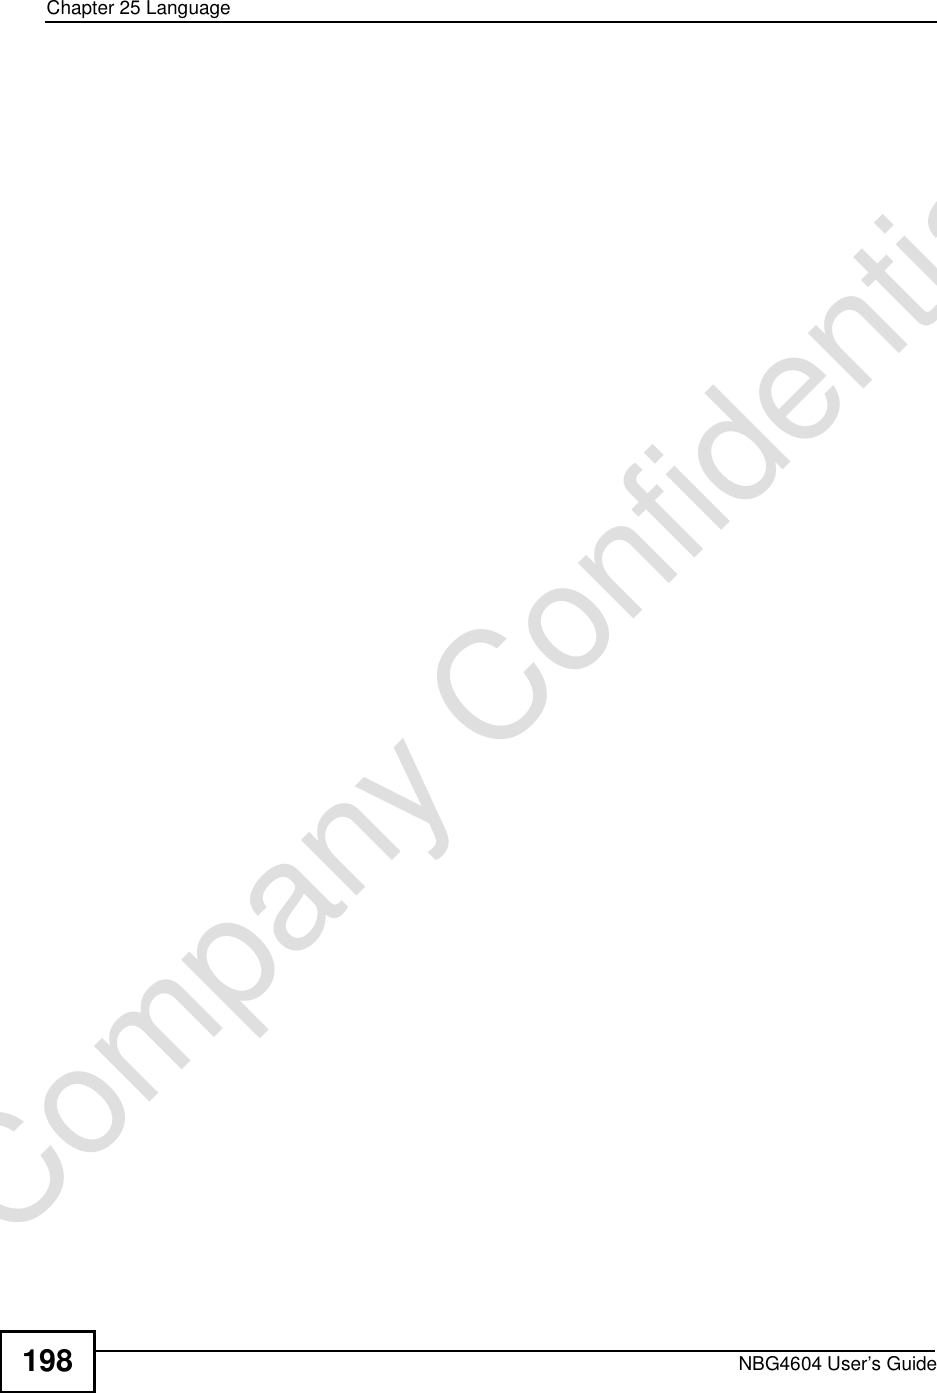 Chapter 25LanguageNBG4604 User’s Guide198Company Confidential